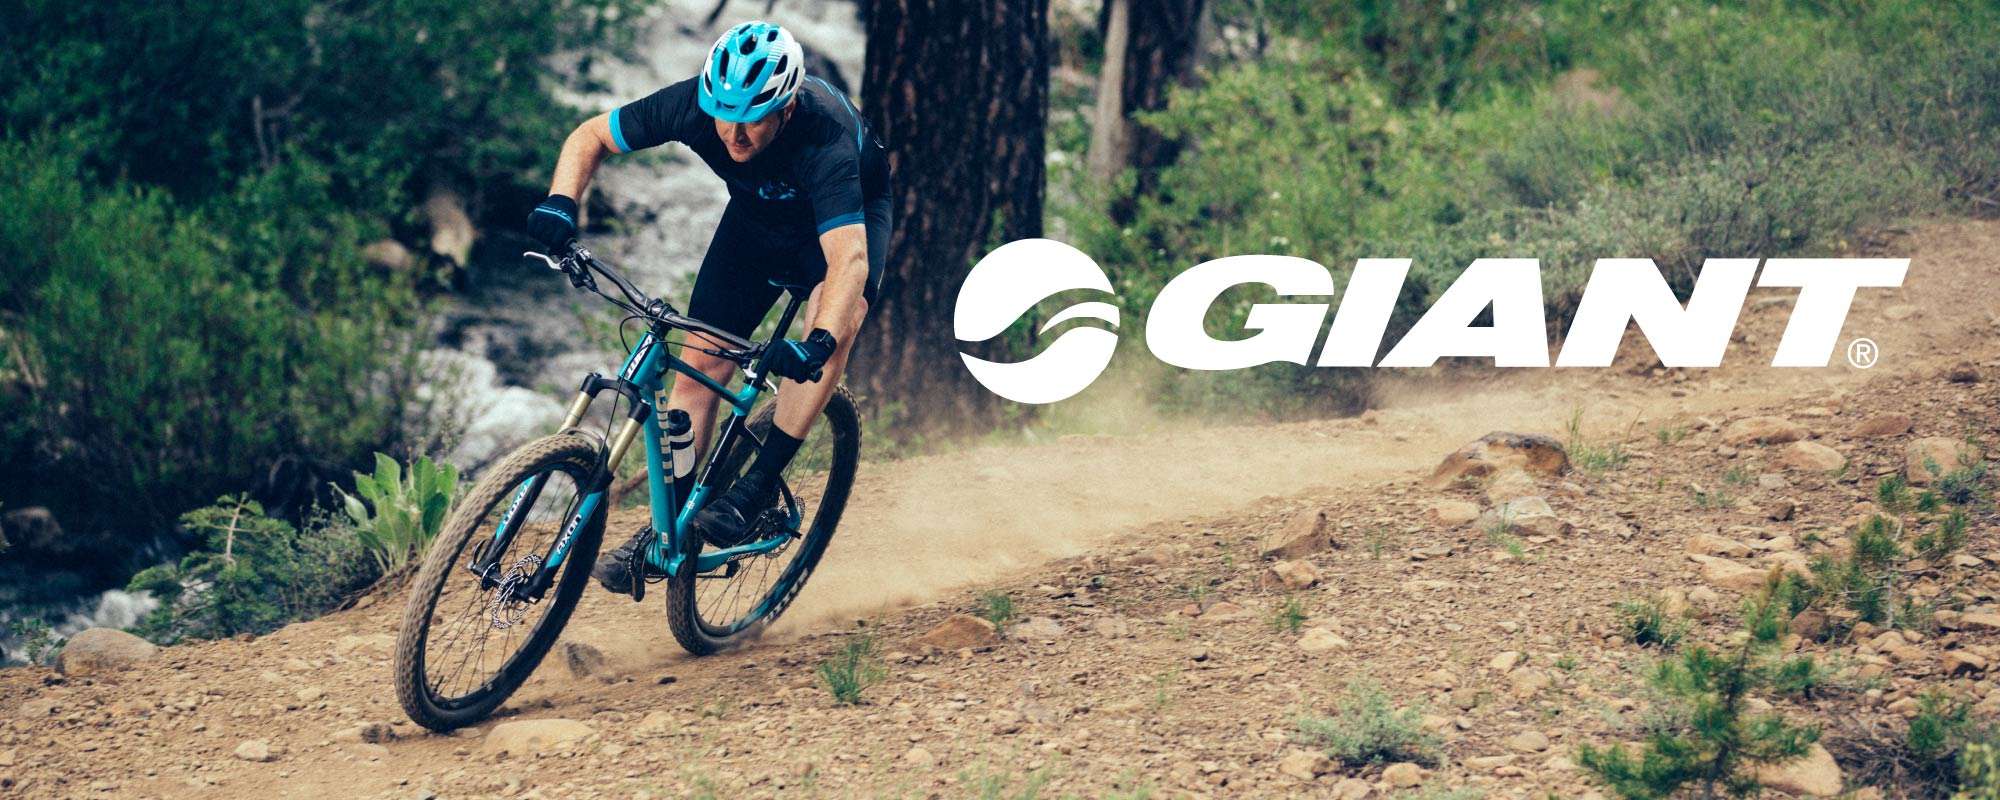 Giant Bicycles For Sale - Bobs Bikes